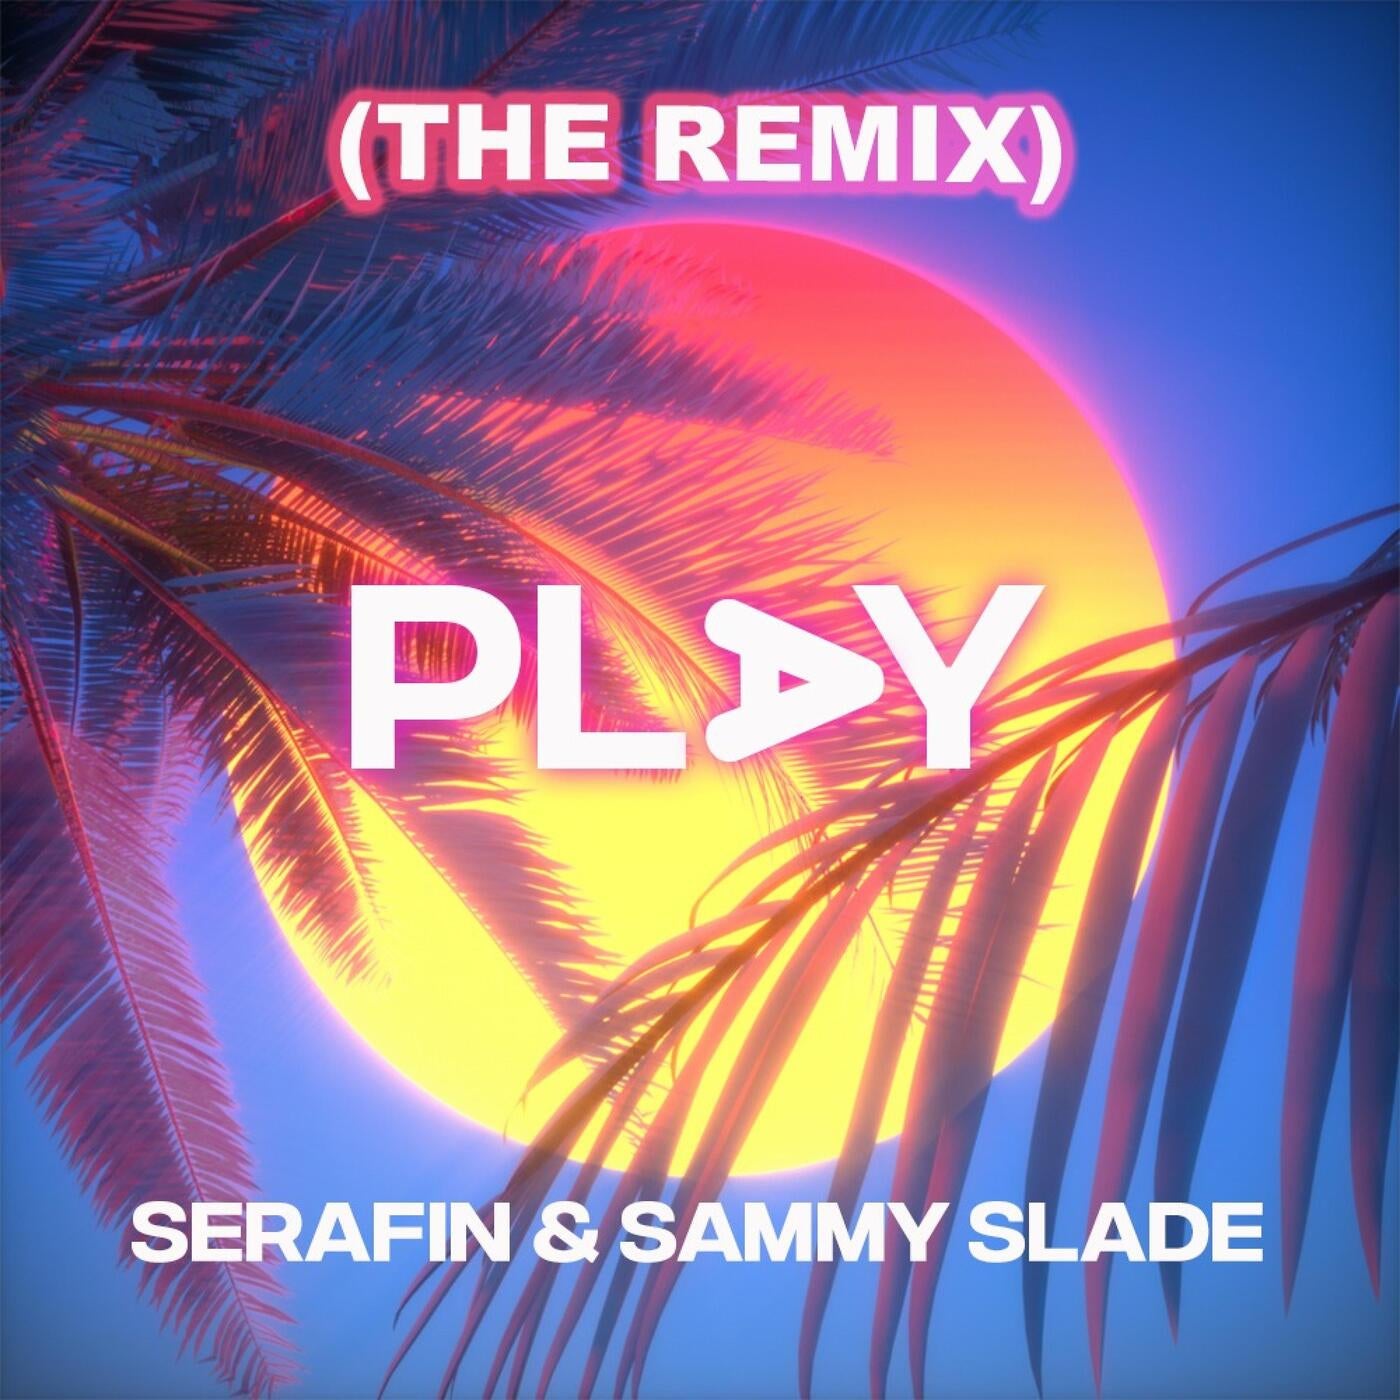 PLAY THE REMIX